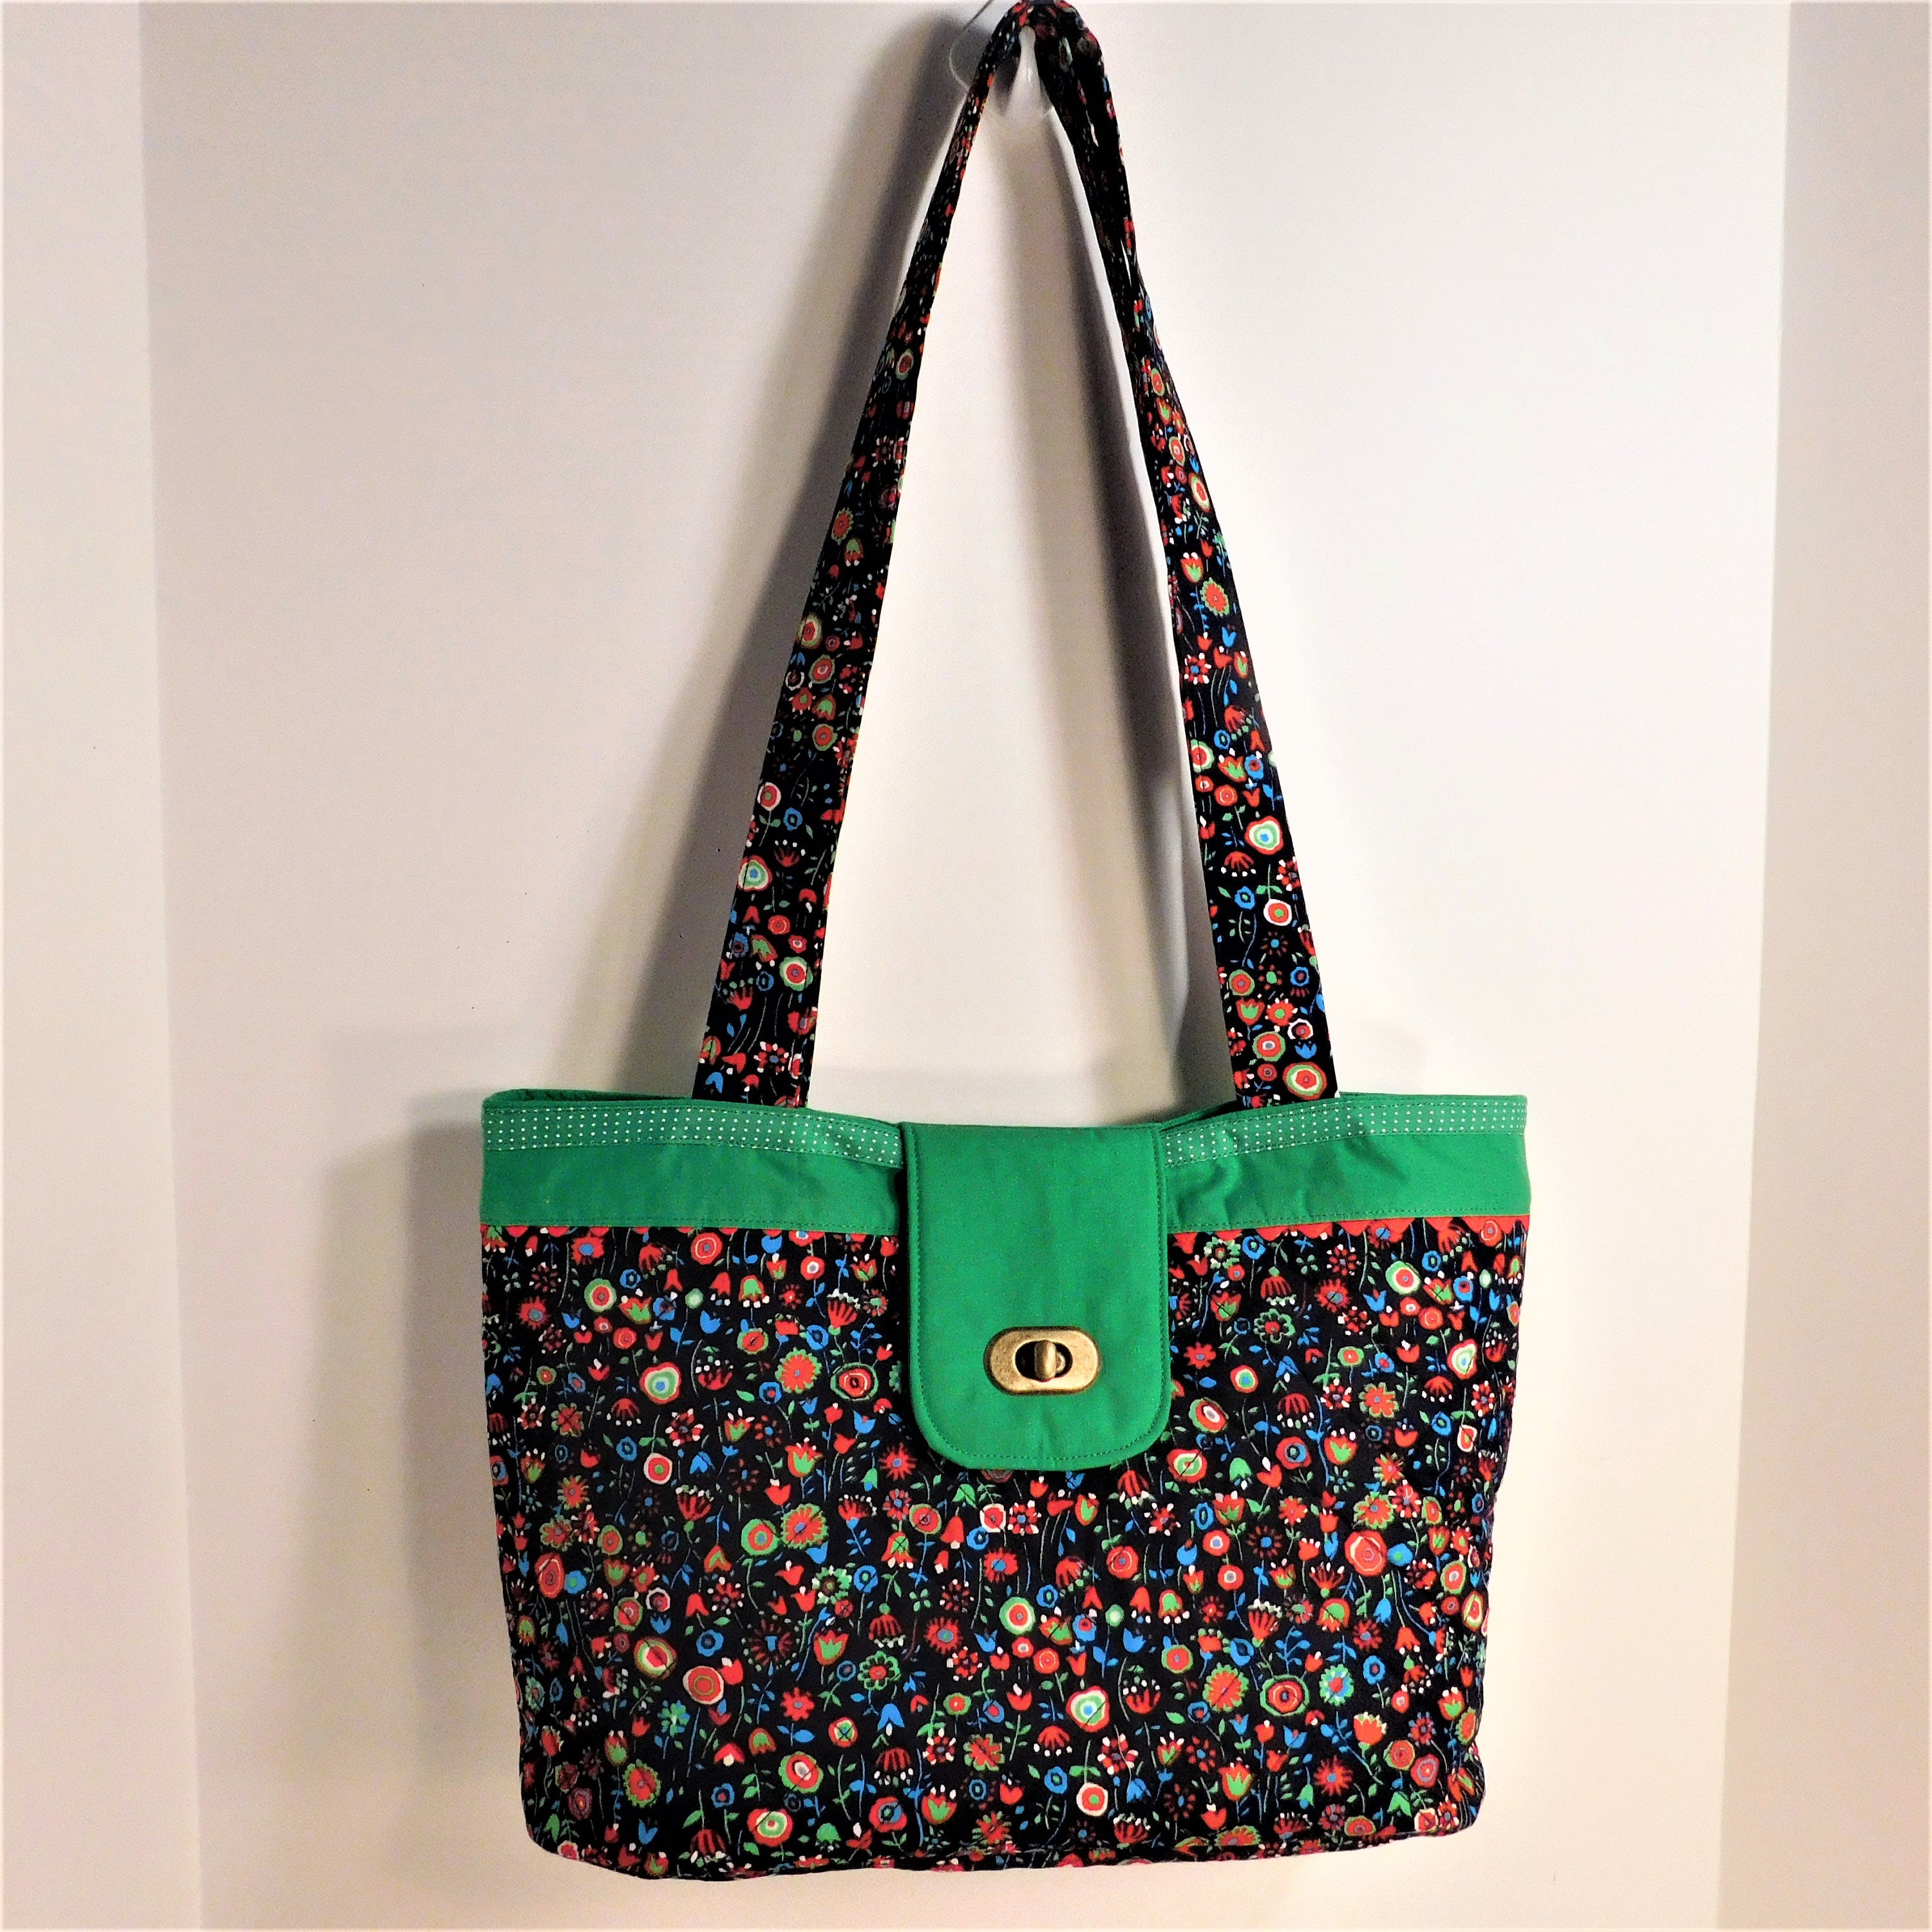 Tote Bag PDF Sewing Pattern Medium Sized Purse, Shoulder Bag With Two ...